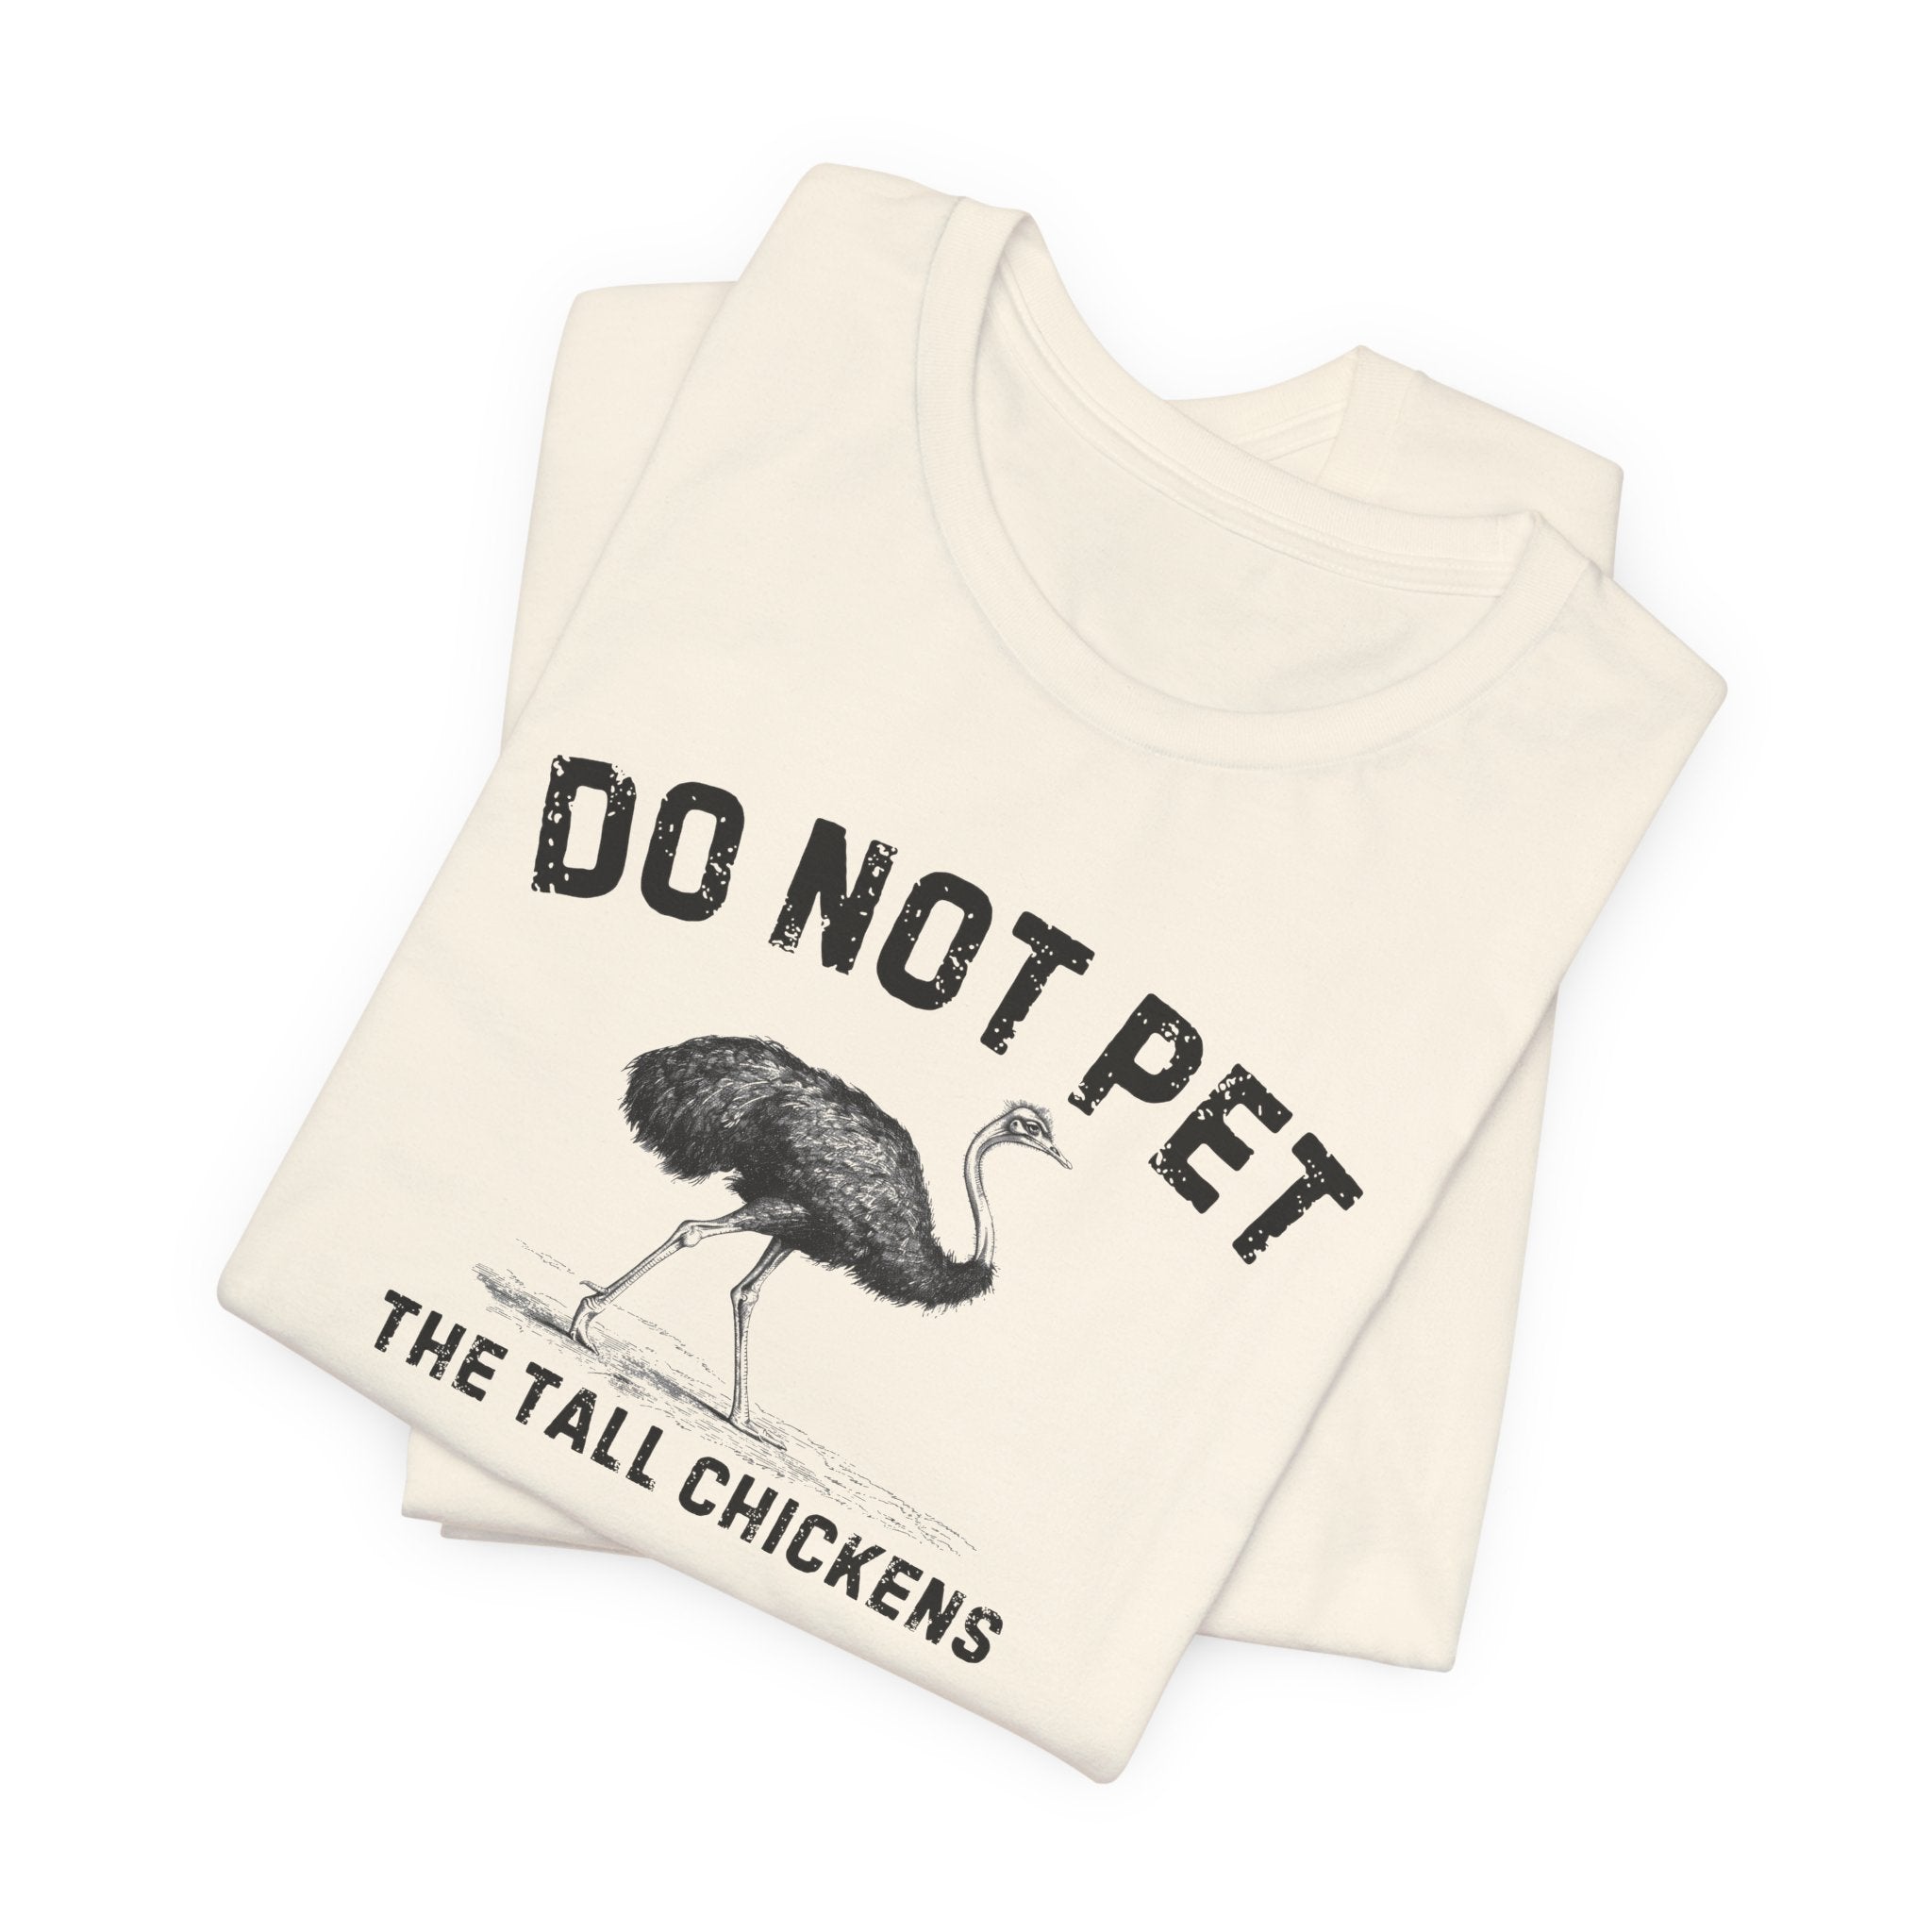 Do Not Pet The Tall Chickens Shirt Funny Ostrich Lover Tee